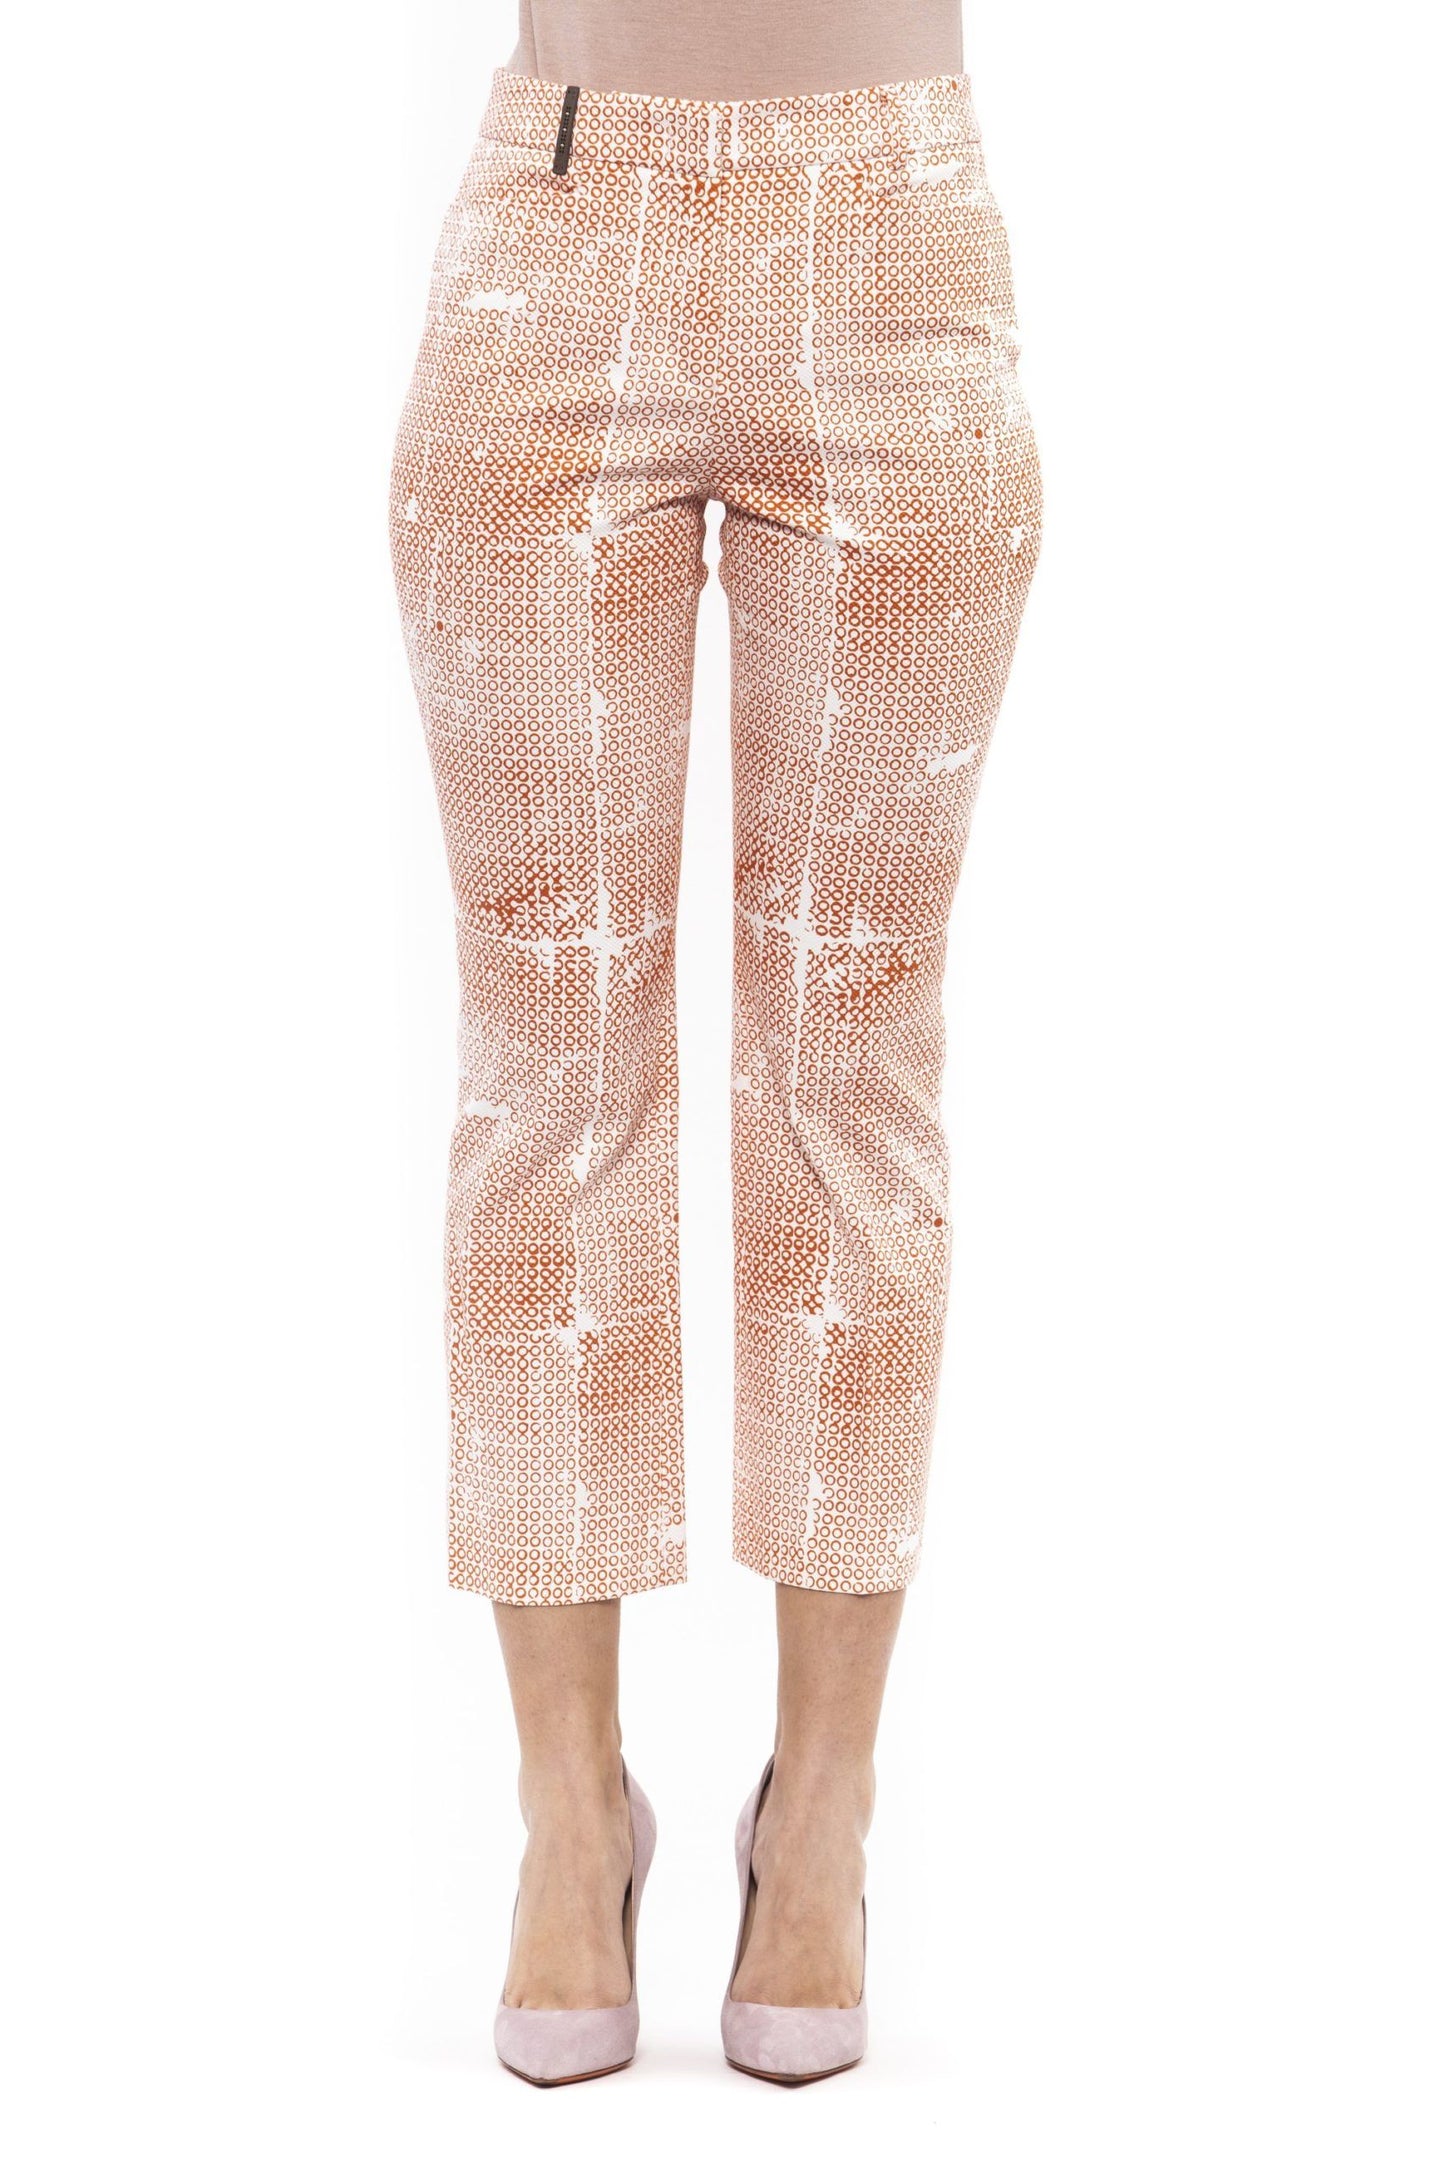 Elegant Printed Stretch Trousers for Sophisticated Style